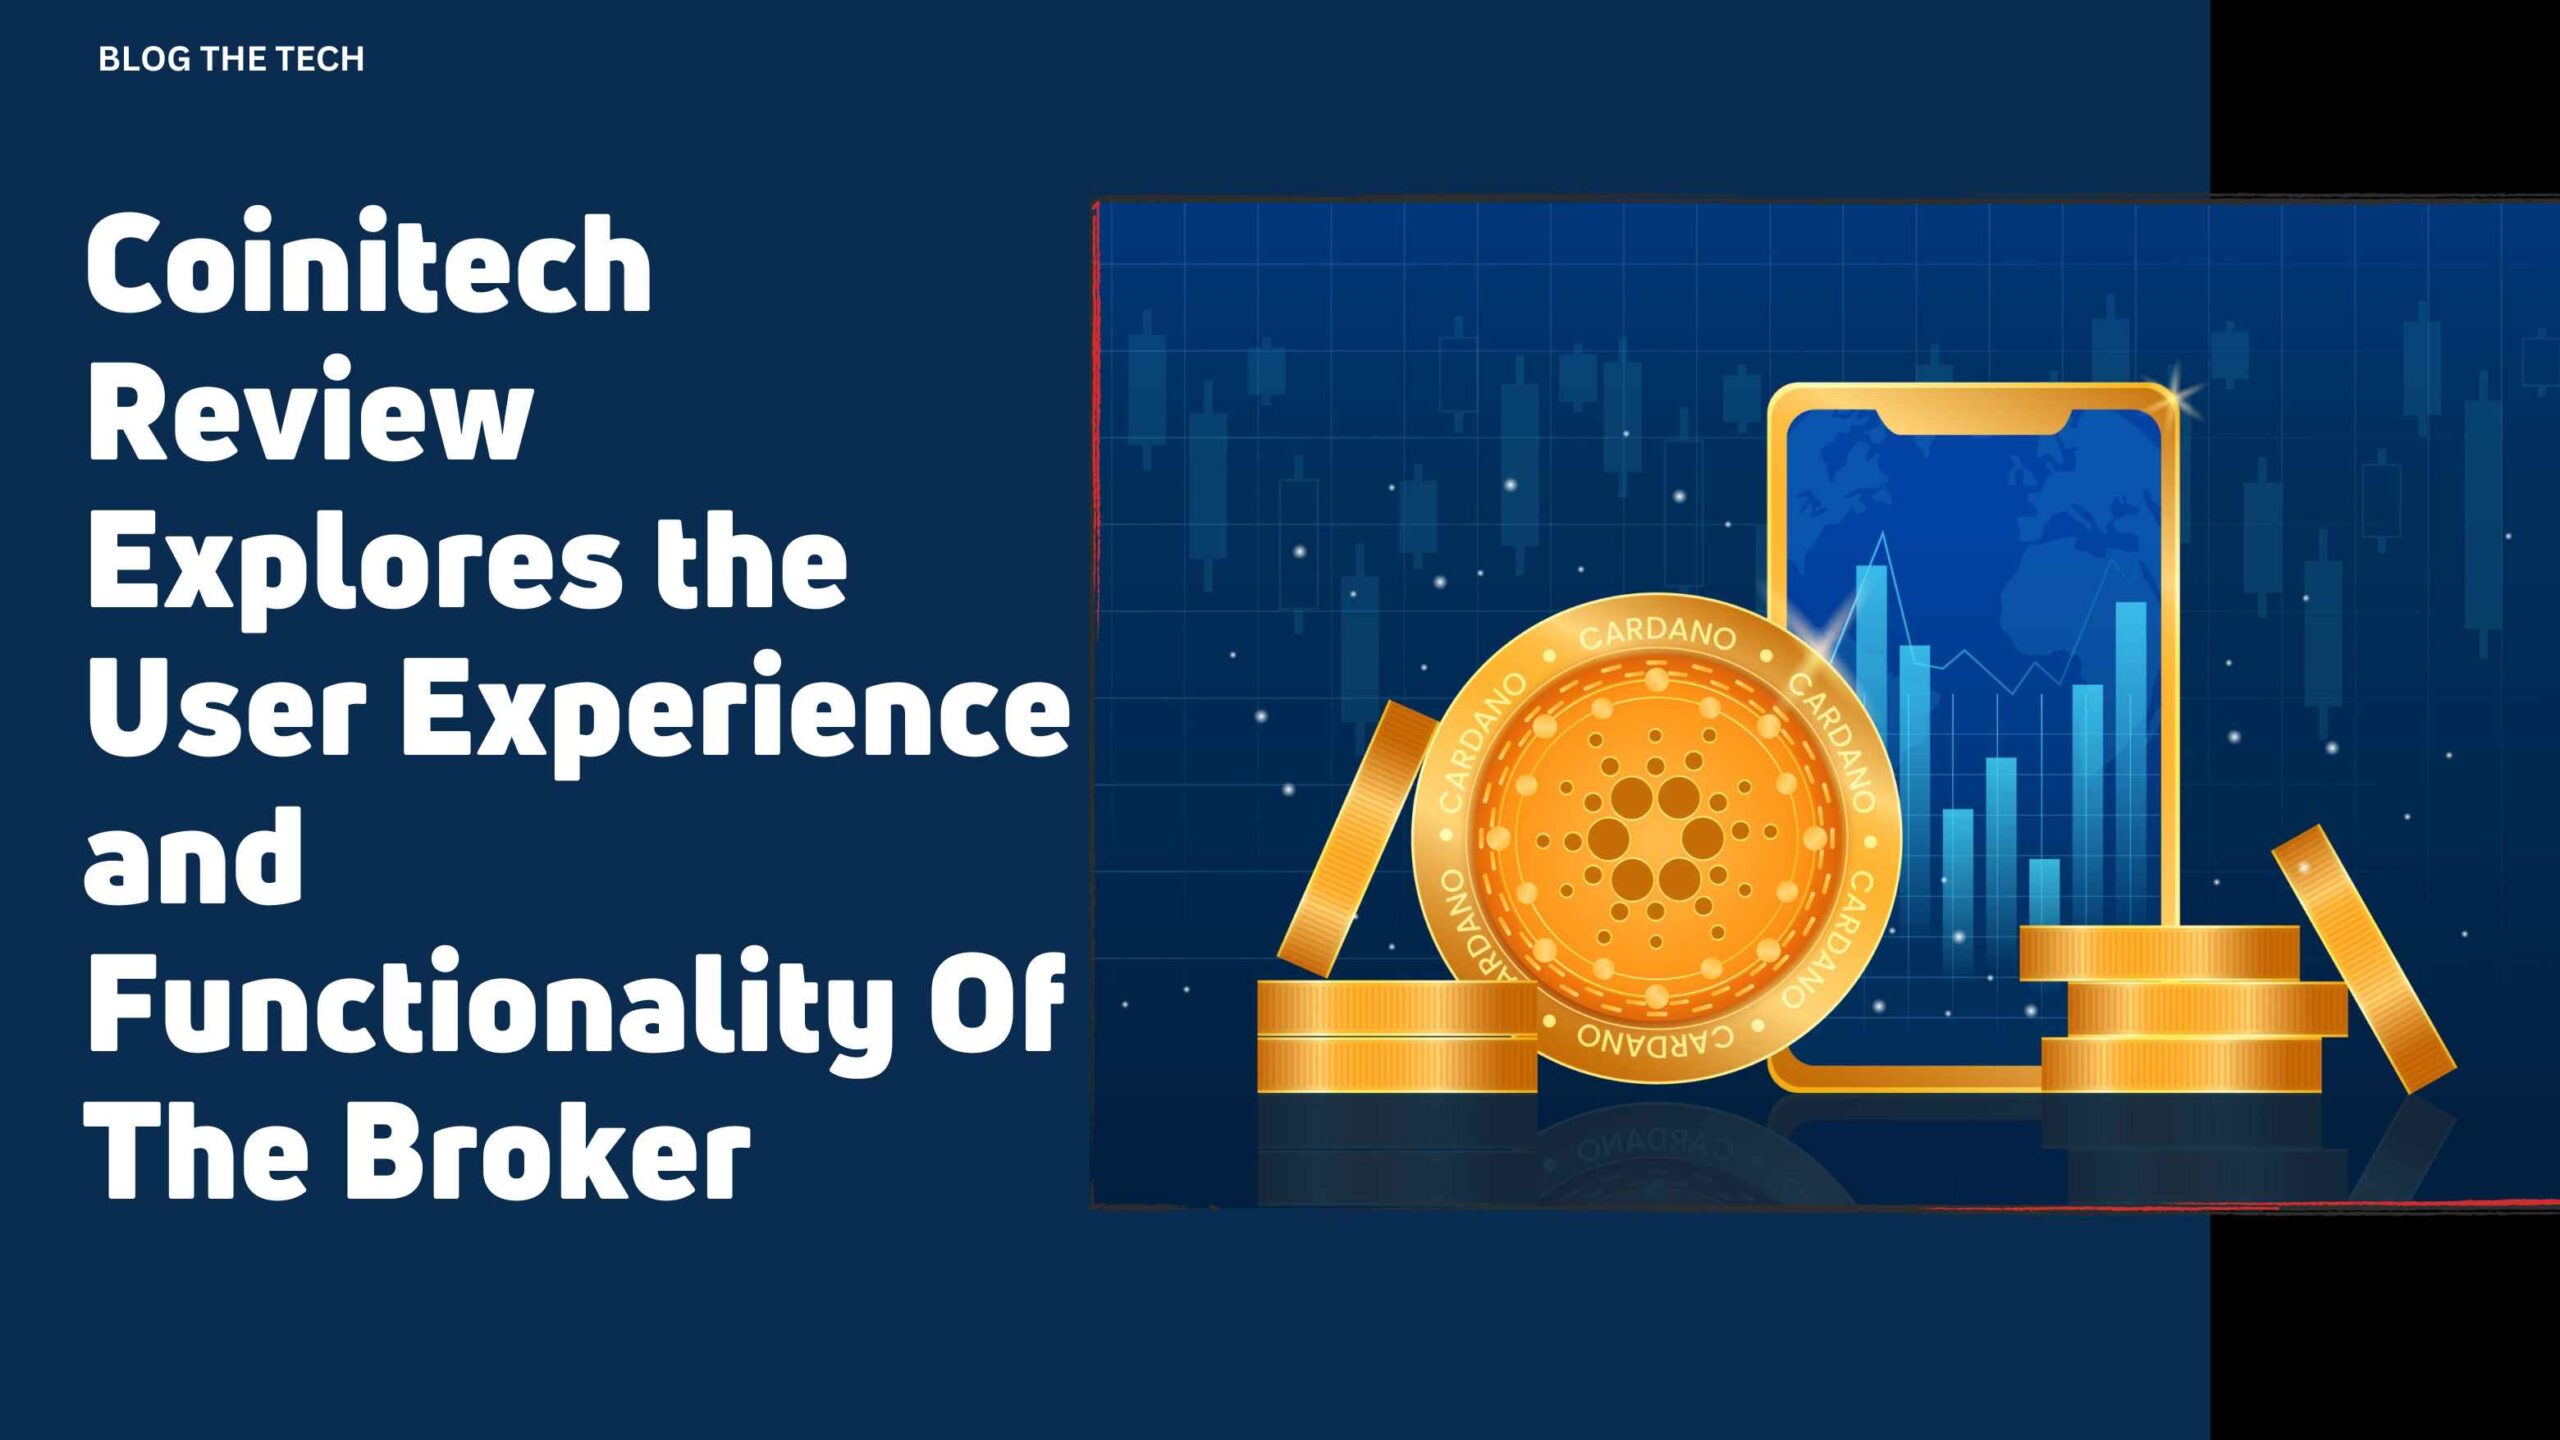 Coinitech Review Explores the User Experience and Functionality Of The Broker